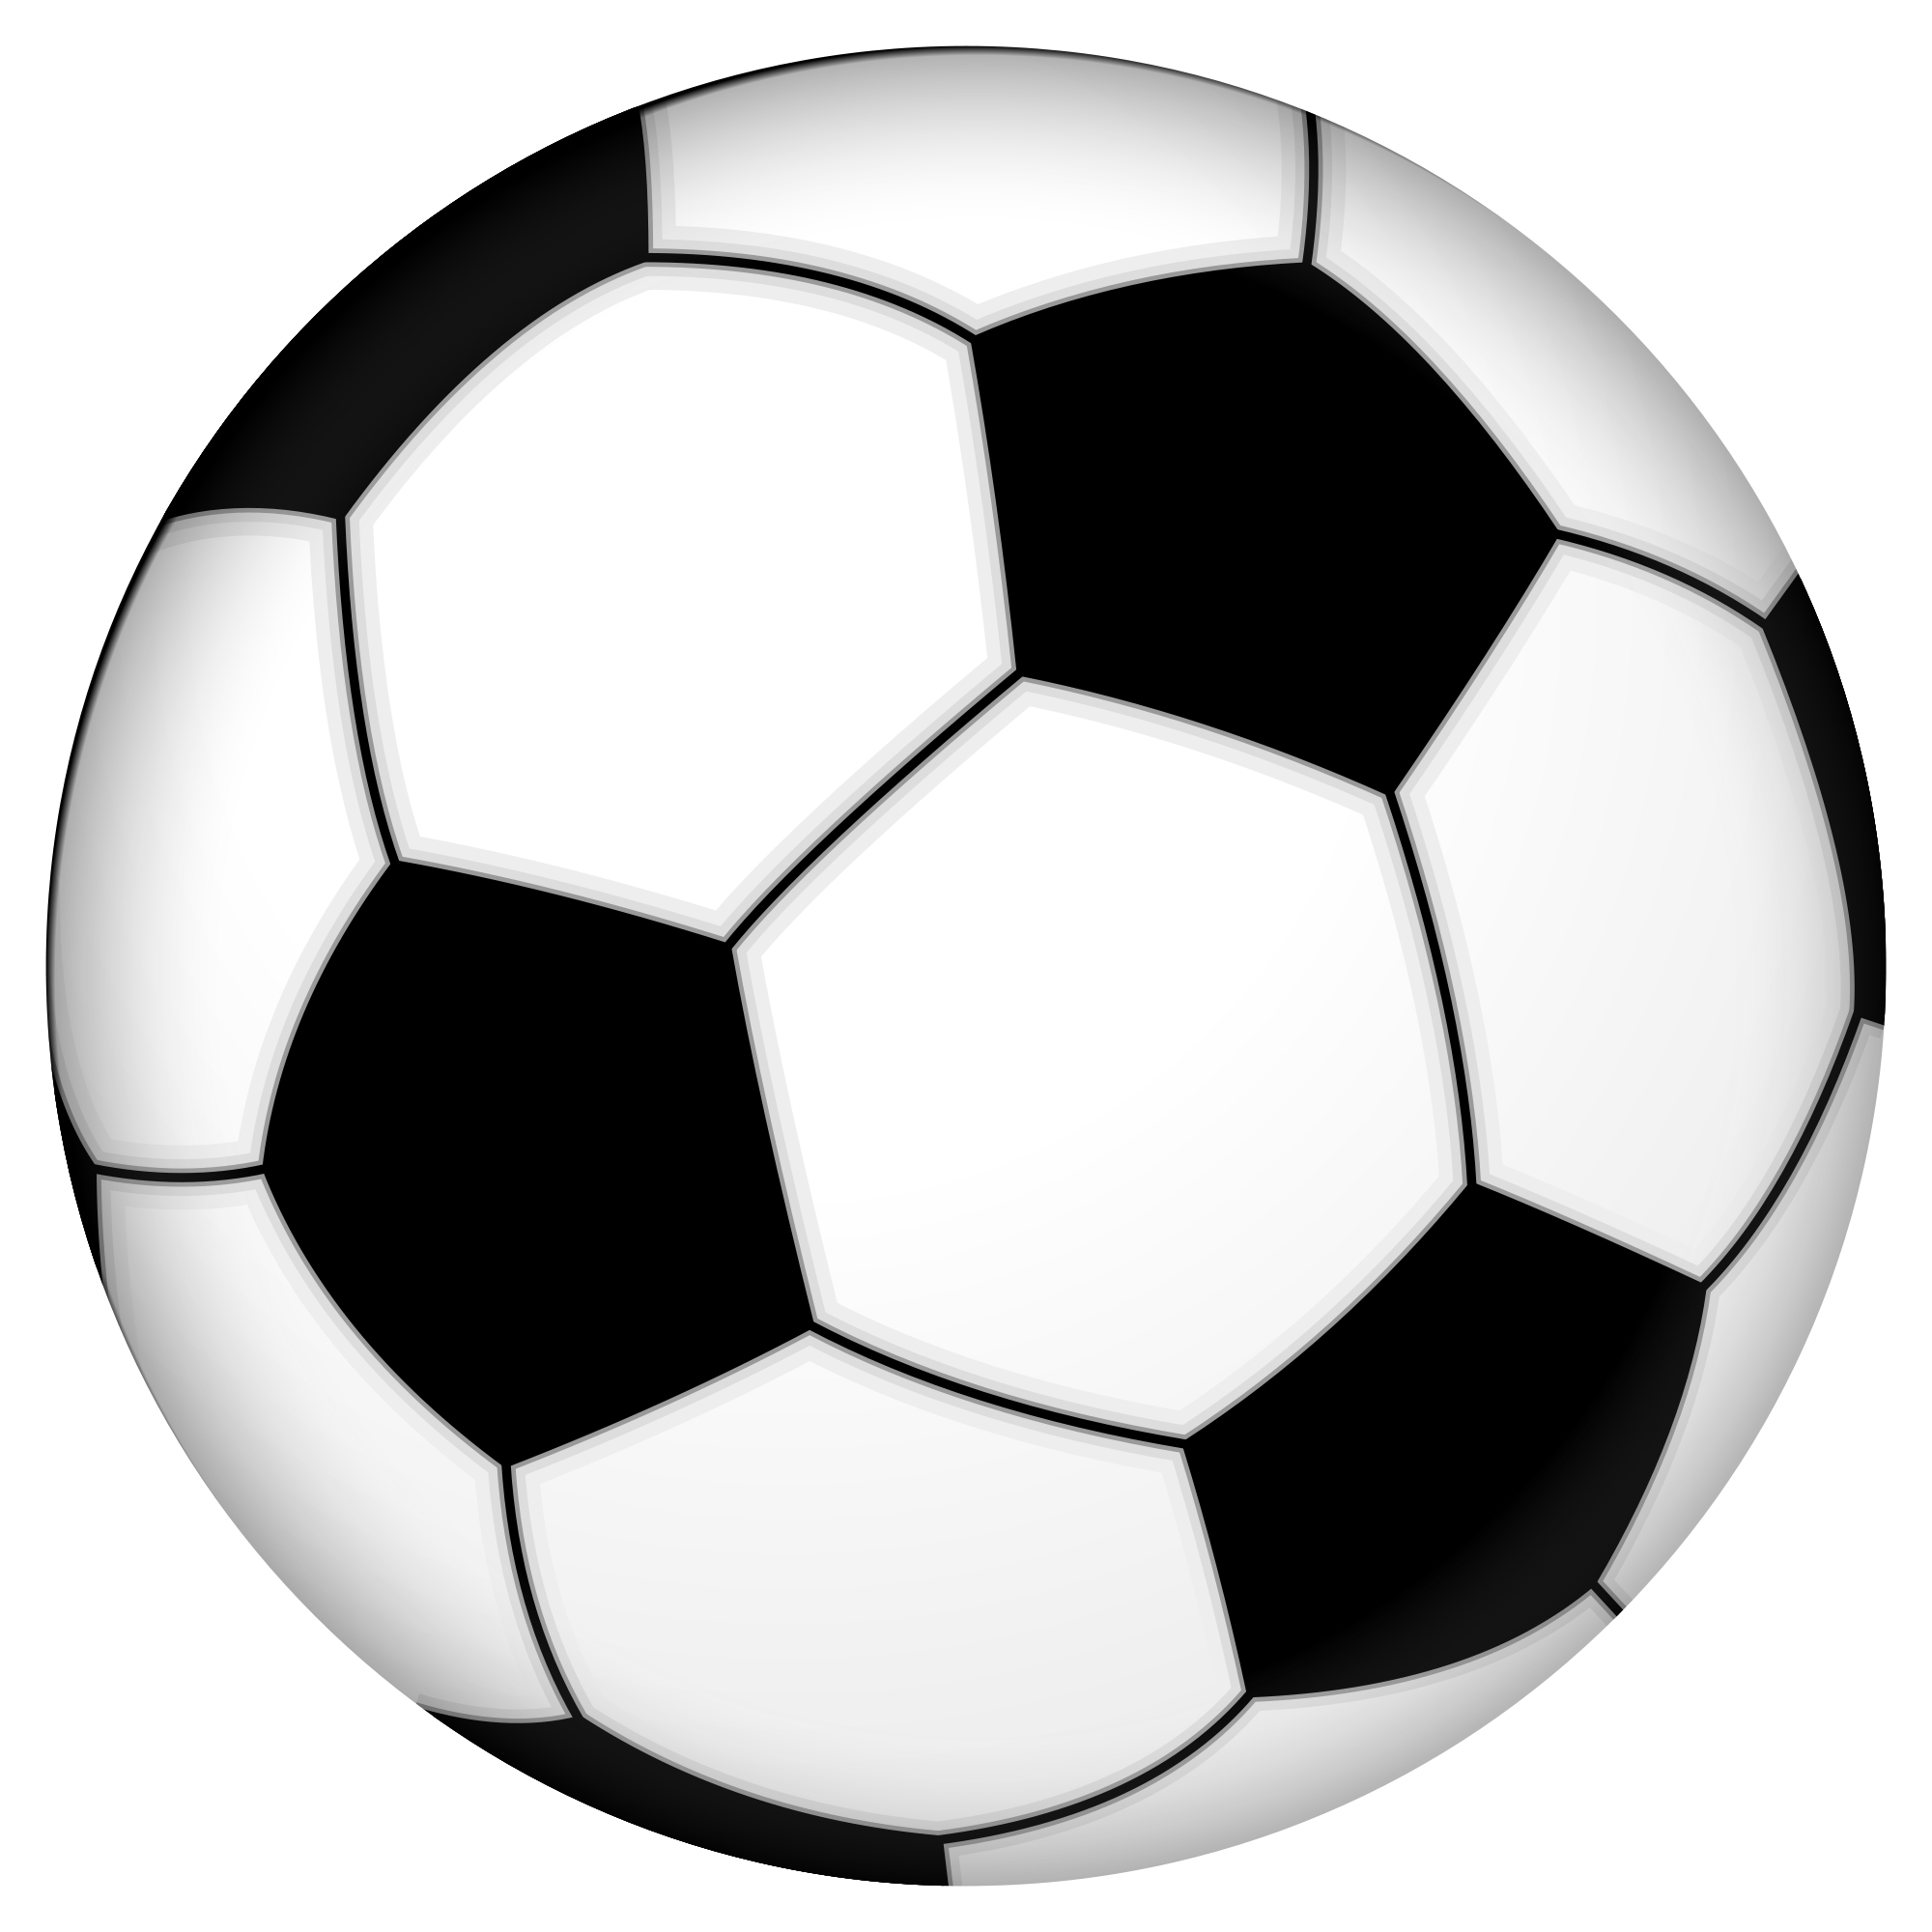 Blue soccer ball clipart free clipart images